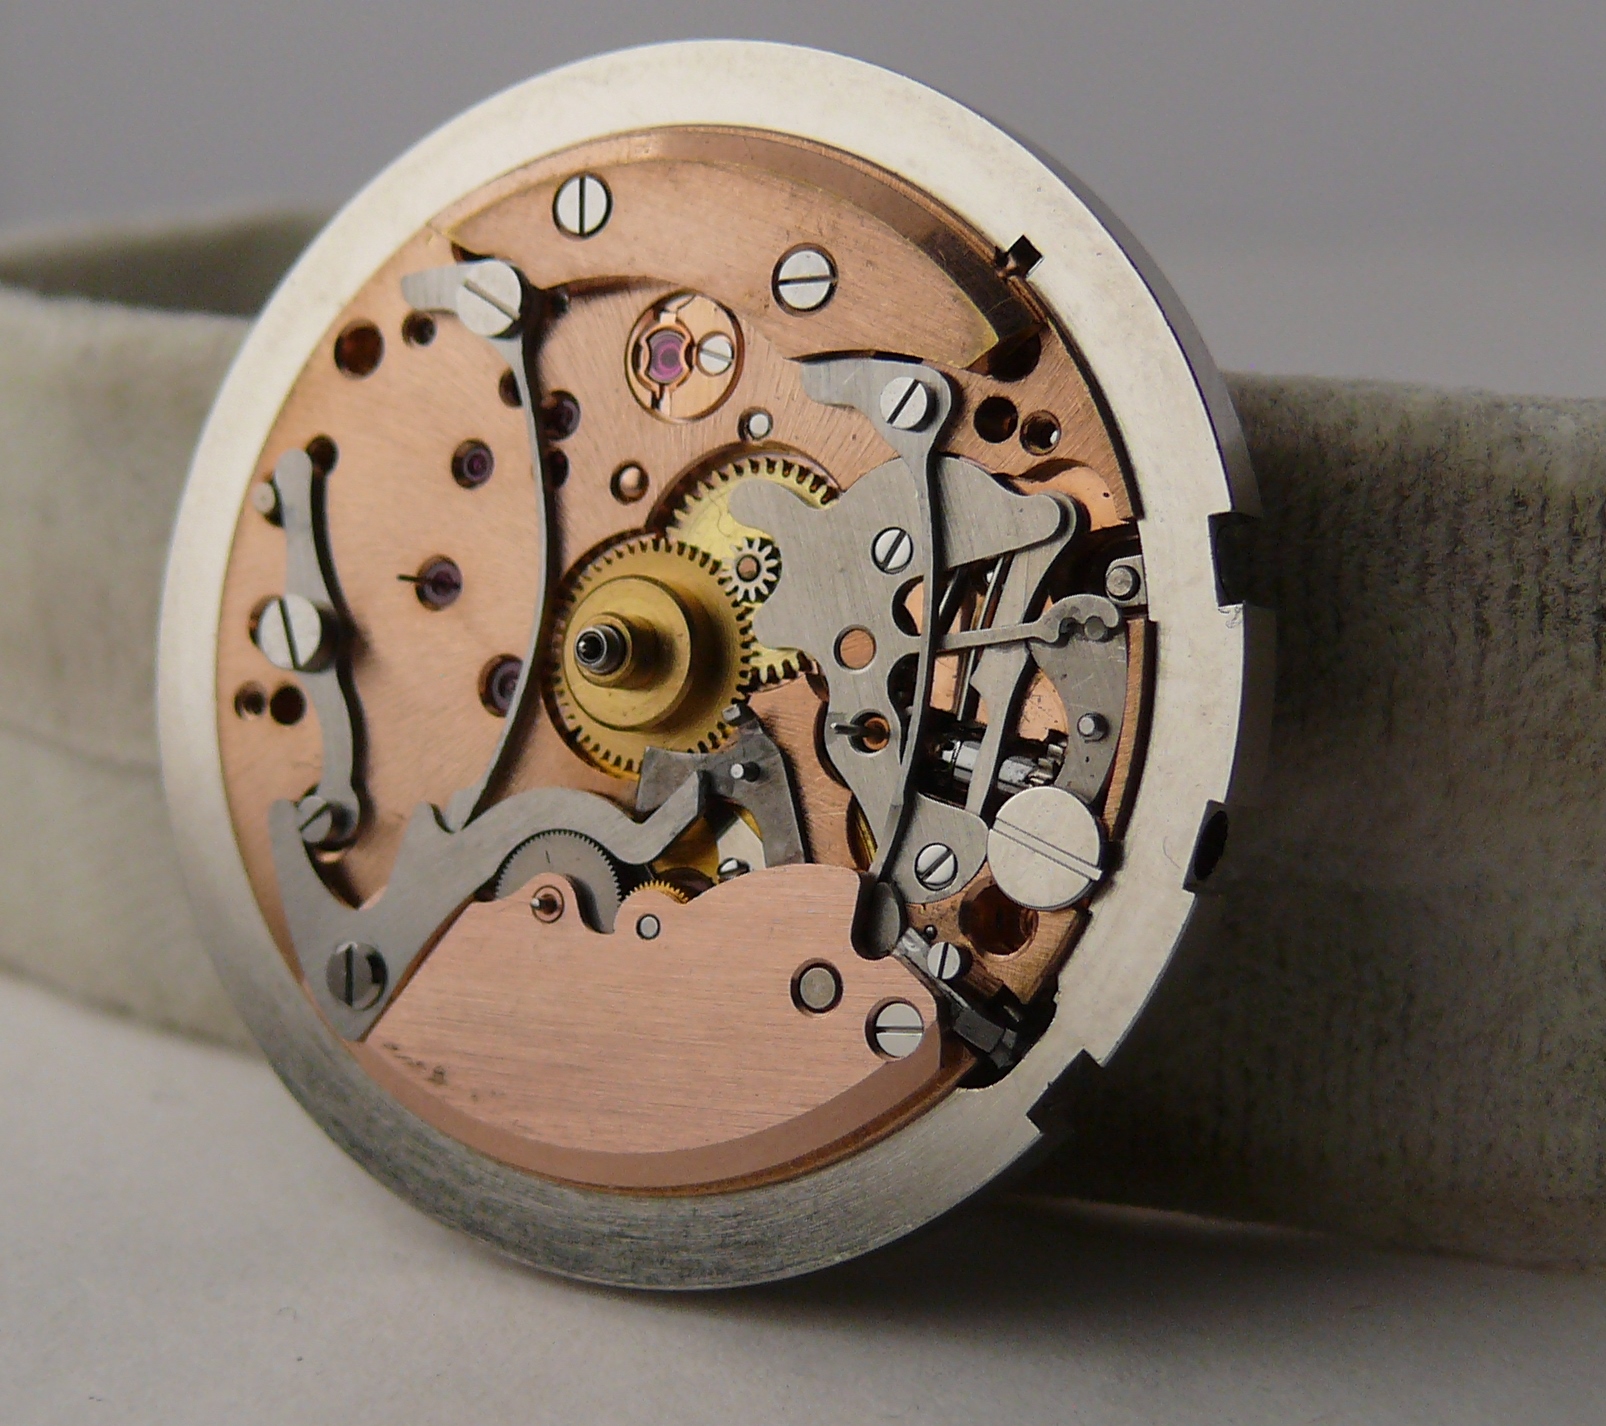 1957 Vintage Omega Speedmaster 2915-1 movement calibre no 321. Movement serial is 15,996,xxx. This